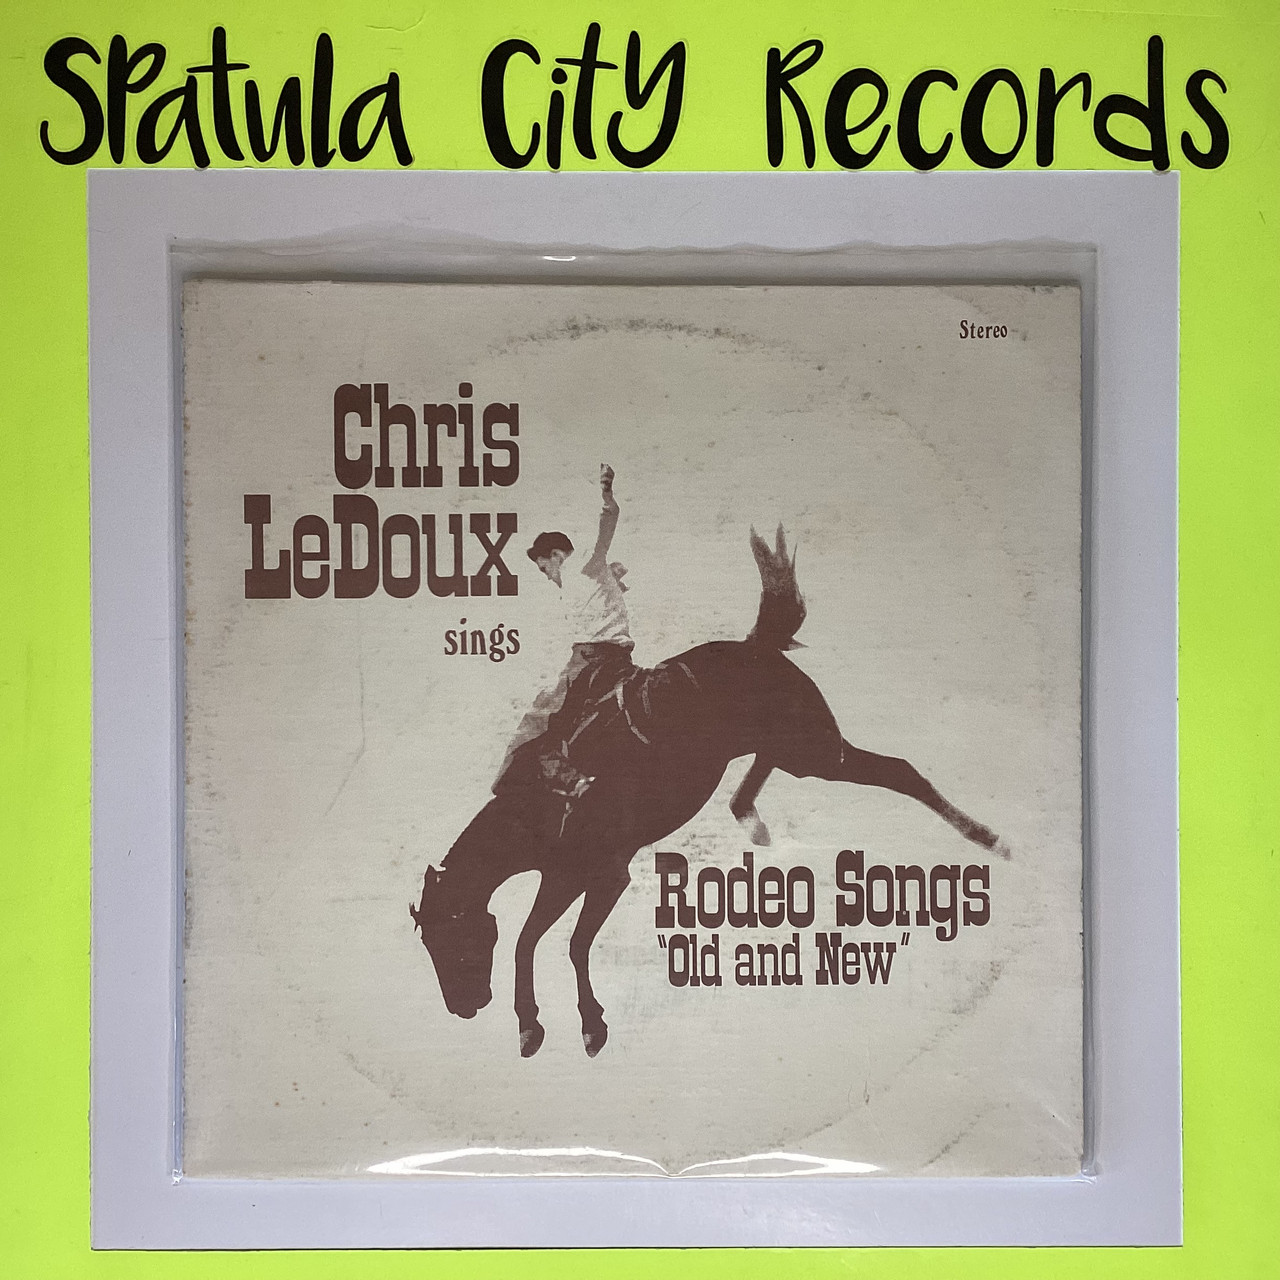 Chris LeDoux - Sings Rodeo Songs "Old And New" - vinyl record LP